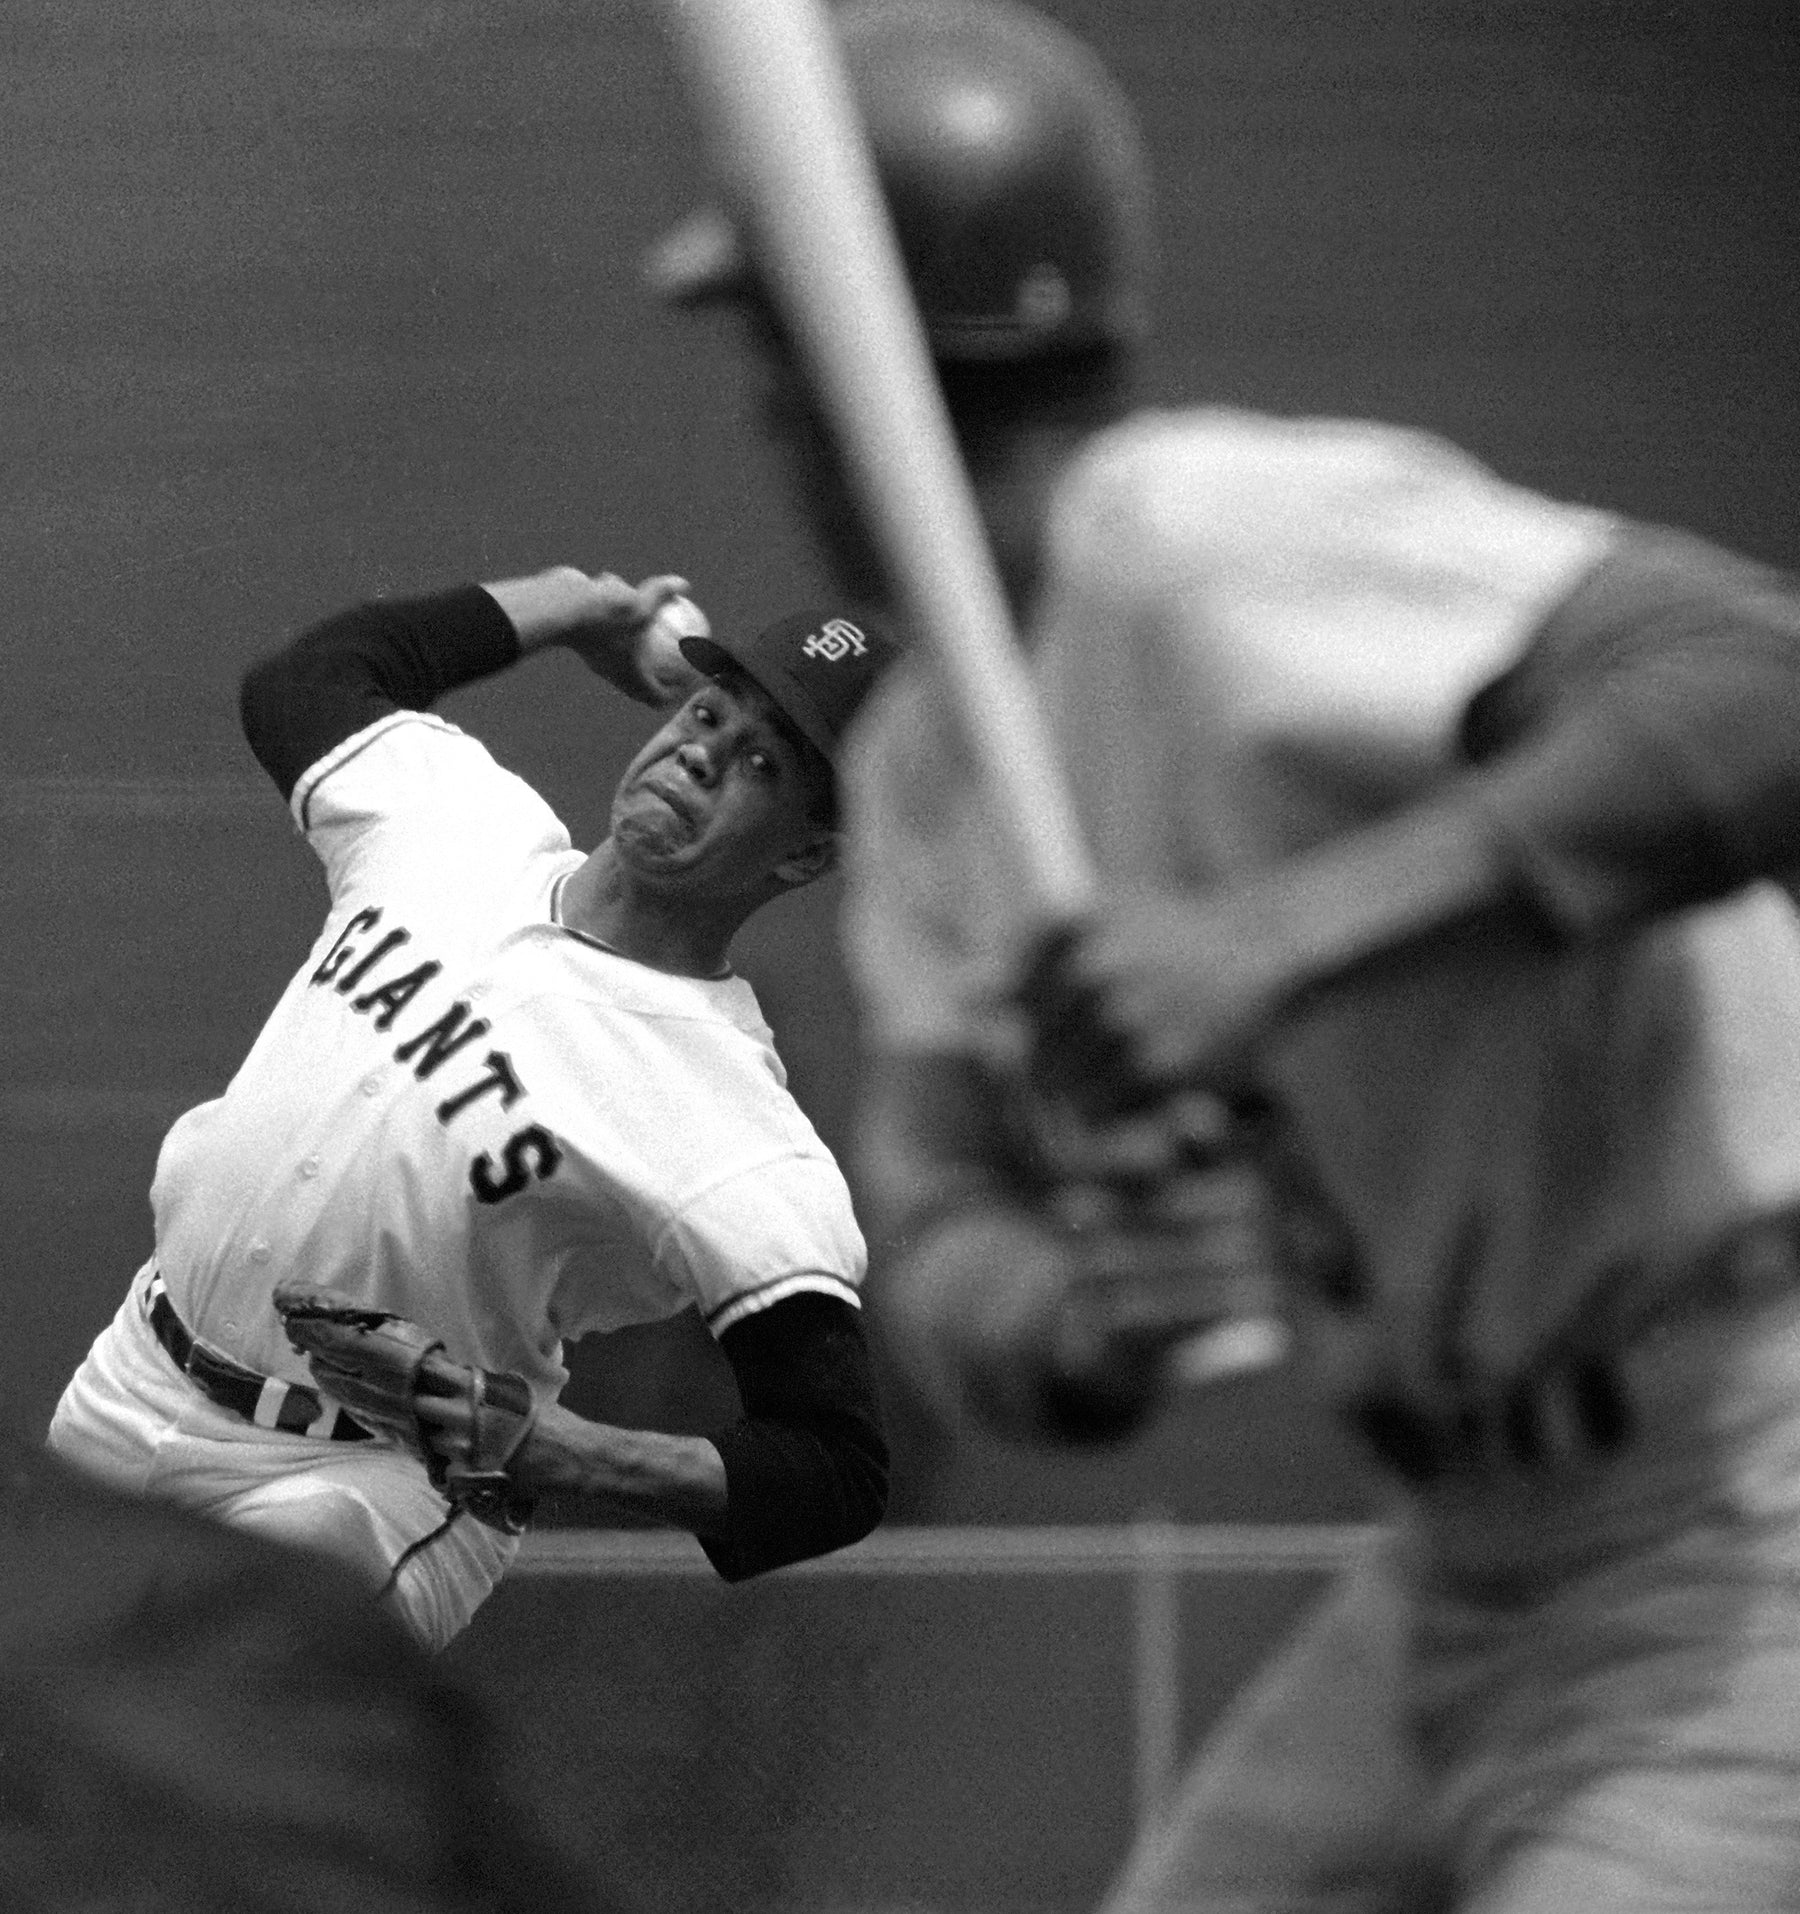 Juan Marichal Pitching to Willie Davis | Neil Leifer Photography 16 x 20 / Edition of 150